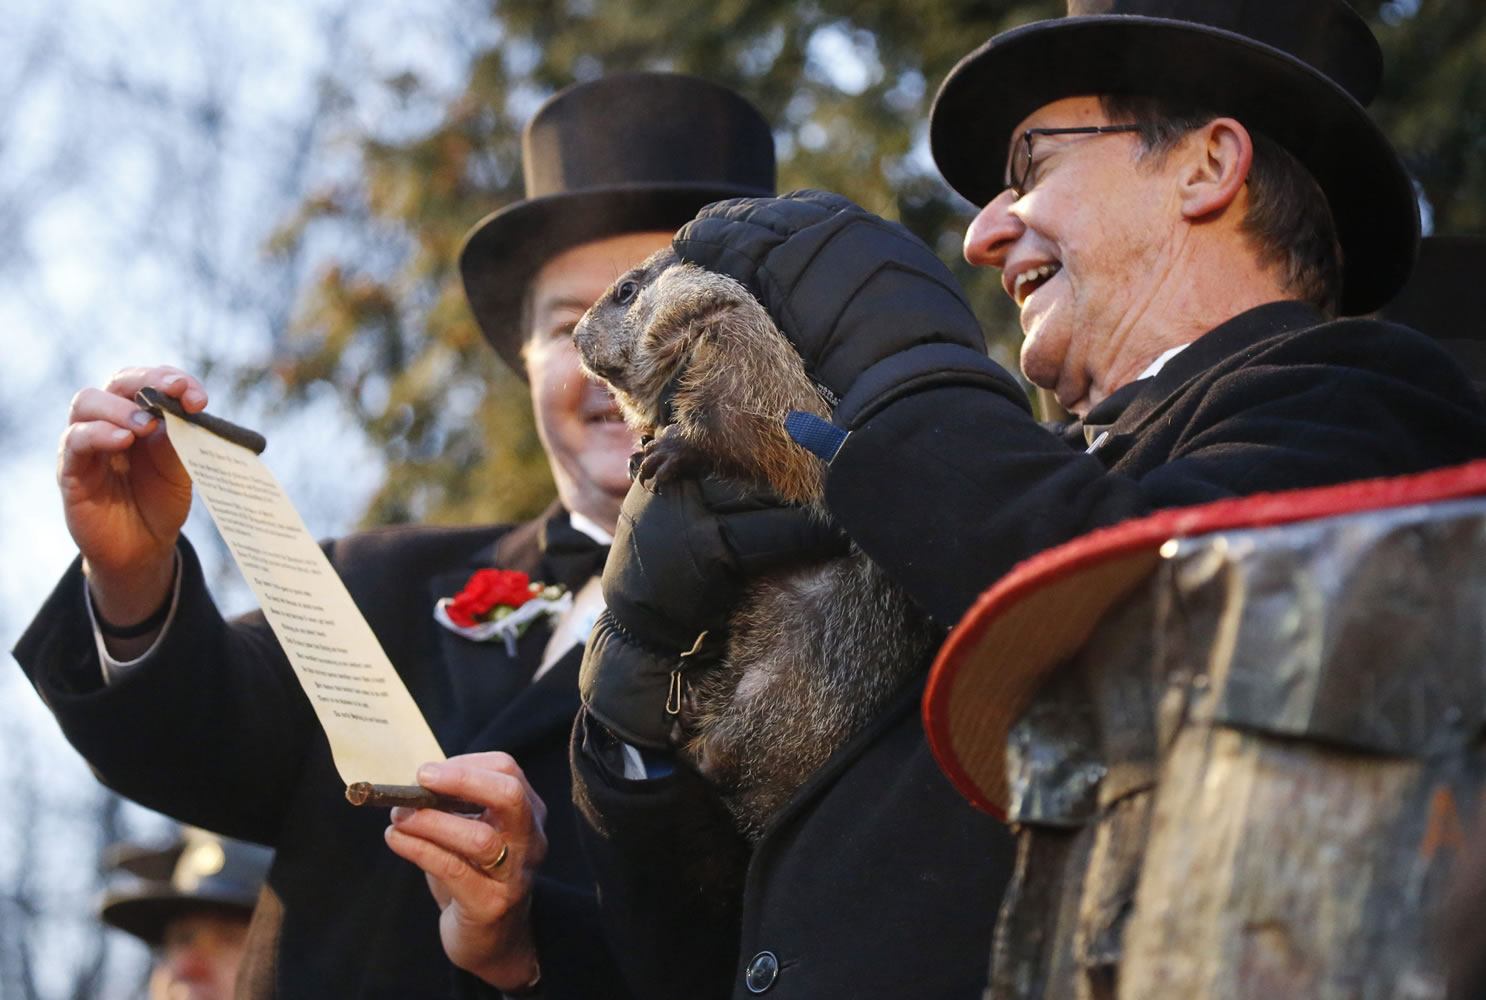 Co-handler Ron Ploucha, right, holds Punxsutawney Phil as Jeff Lundy, vice president of the Inner Circle of the Punxsutawney Groundhog Club, holds the scroll Tuesday during the annual celebration of Groundhog Day on Gobbler&#039;s Knob in Punxsutawney, Pa.